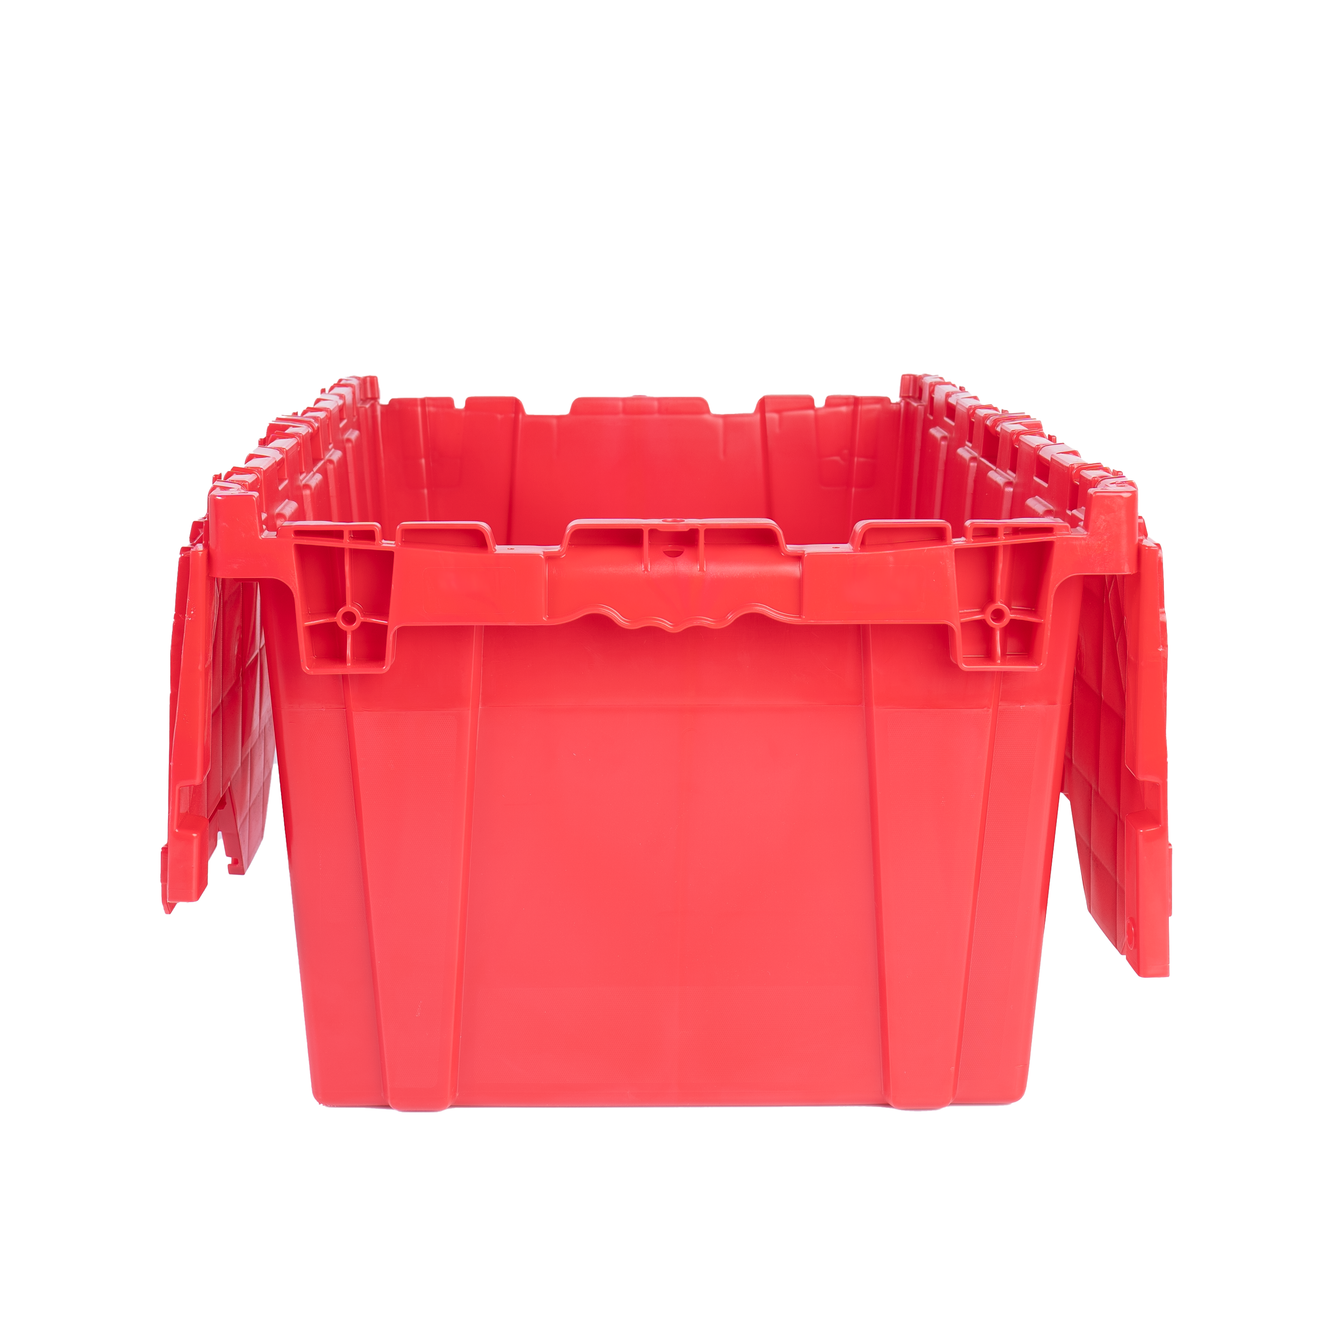 Monoflo International - DCNA02-271712  27 x 17 x 12 – Handheld Attached Lid Container - available in Gray, Black, Blue, Green and Red.